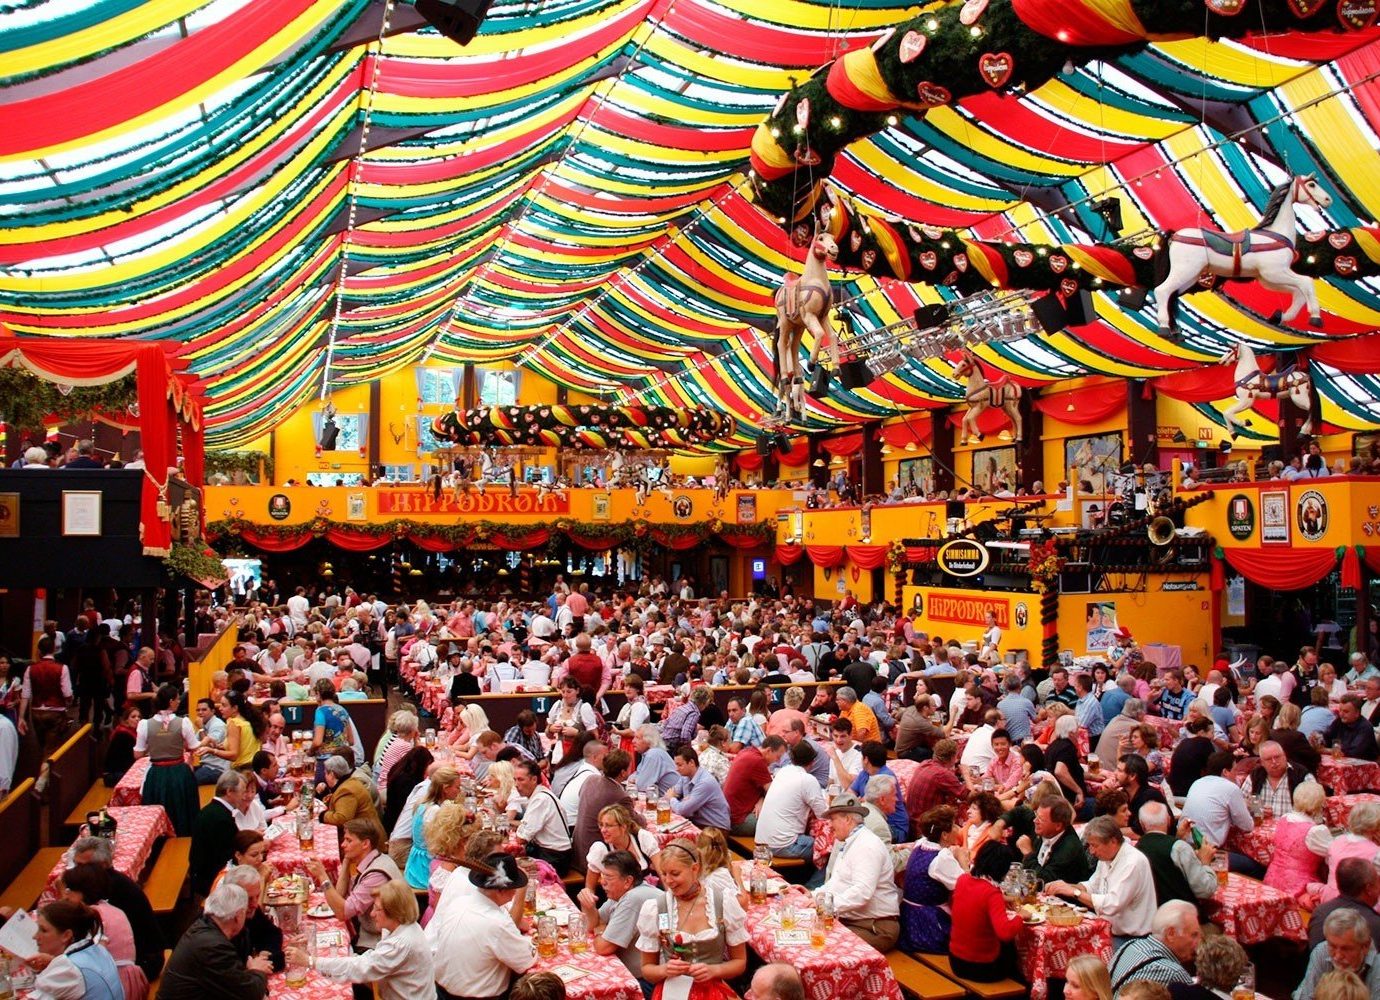 Trip Ideas person crowd outdoor people colorful event festival audience market chinese new year bazaar carnival colored auditorium